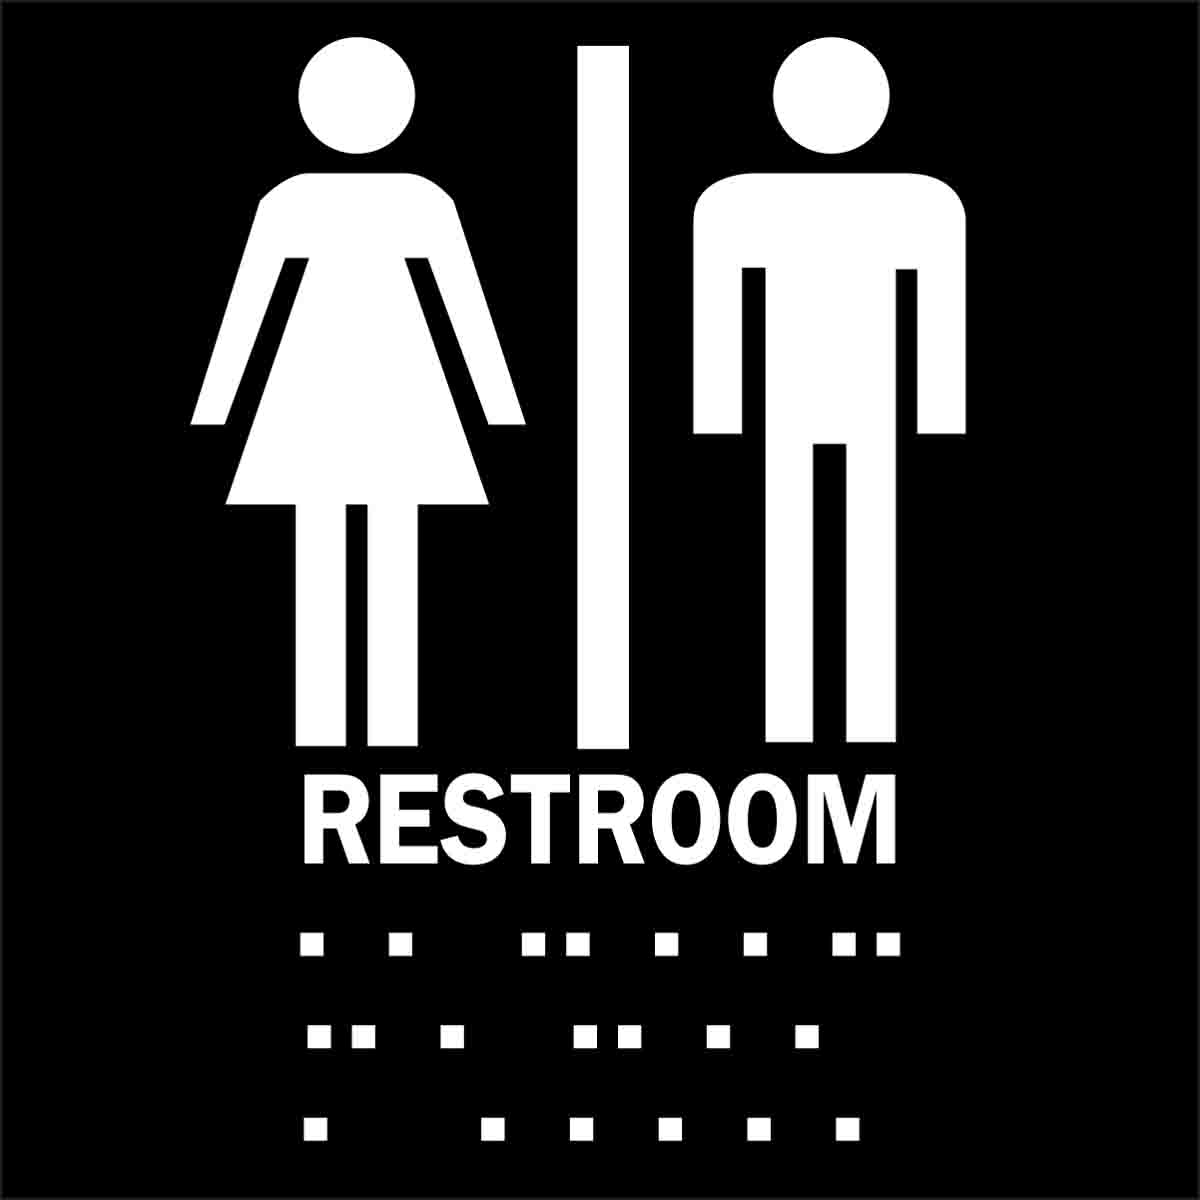 8X8 UNI-SEX RESTROOM SIGN BLK
SIGN W/ WHITE LETTERS W/
BRAIL, PLASTIC SQUARE, ADA
APPROVED